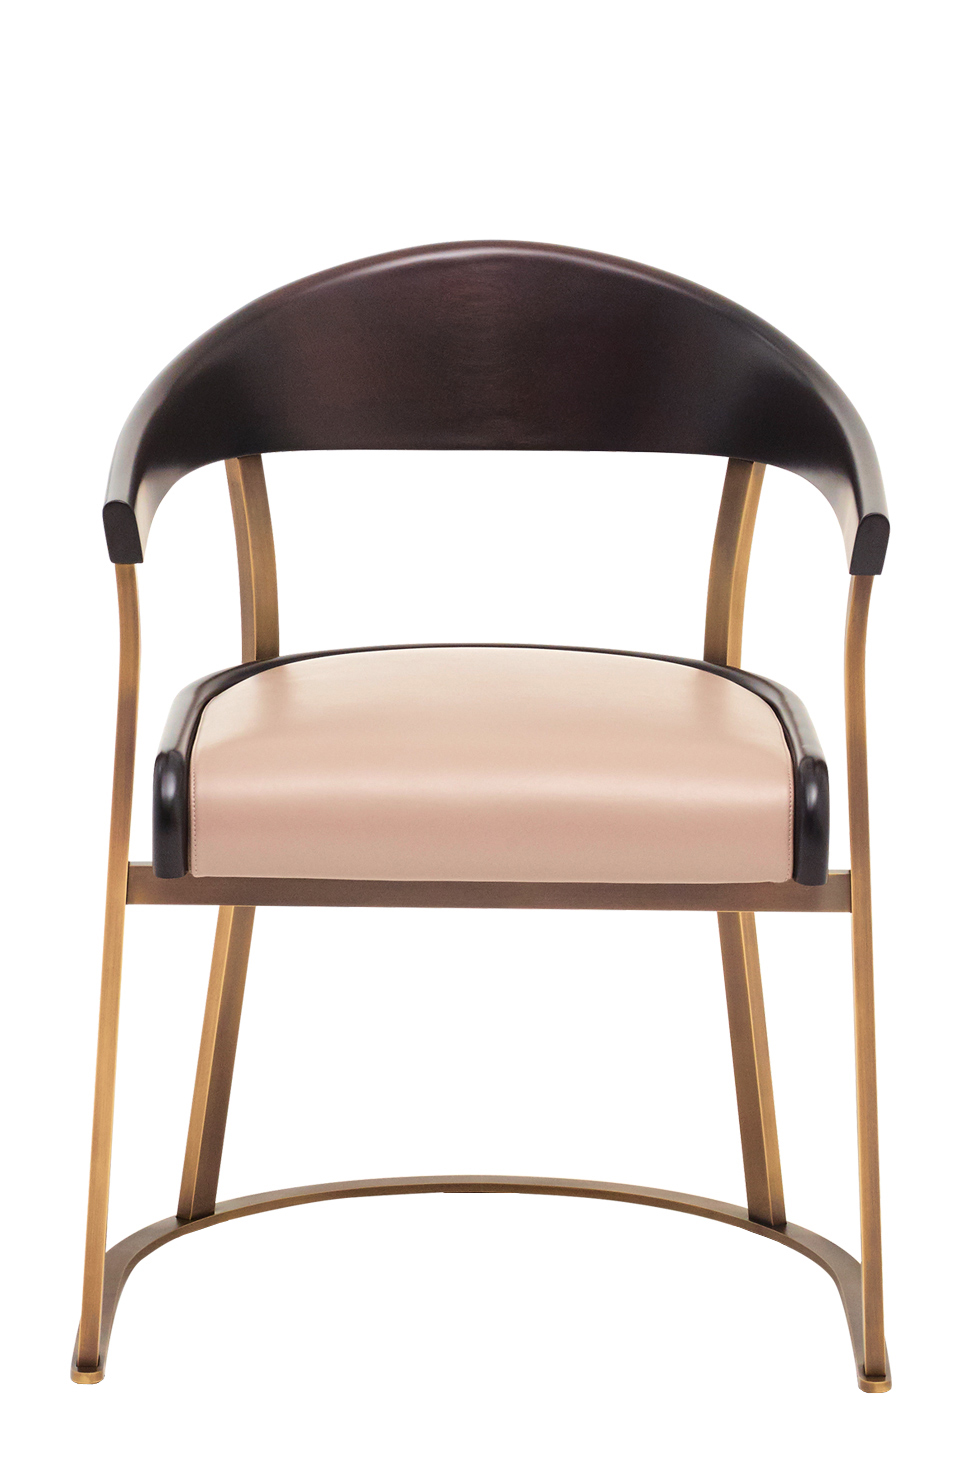 Rachele is a bronze chair with arms with wooden or leather back and leather seat, from Promemoria's catalogue | Promemoria